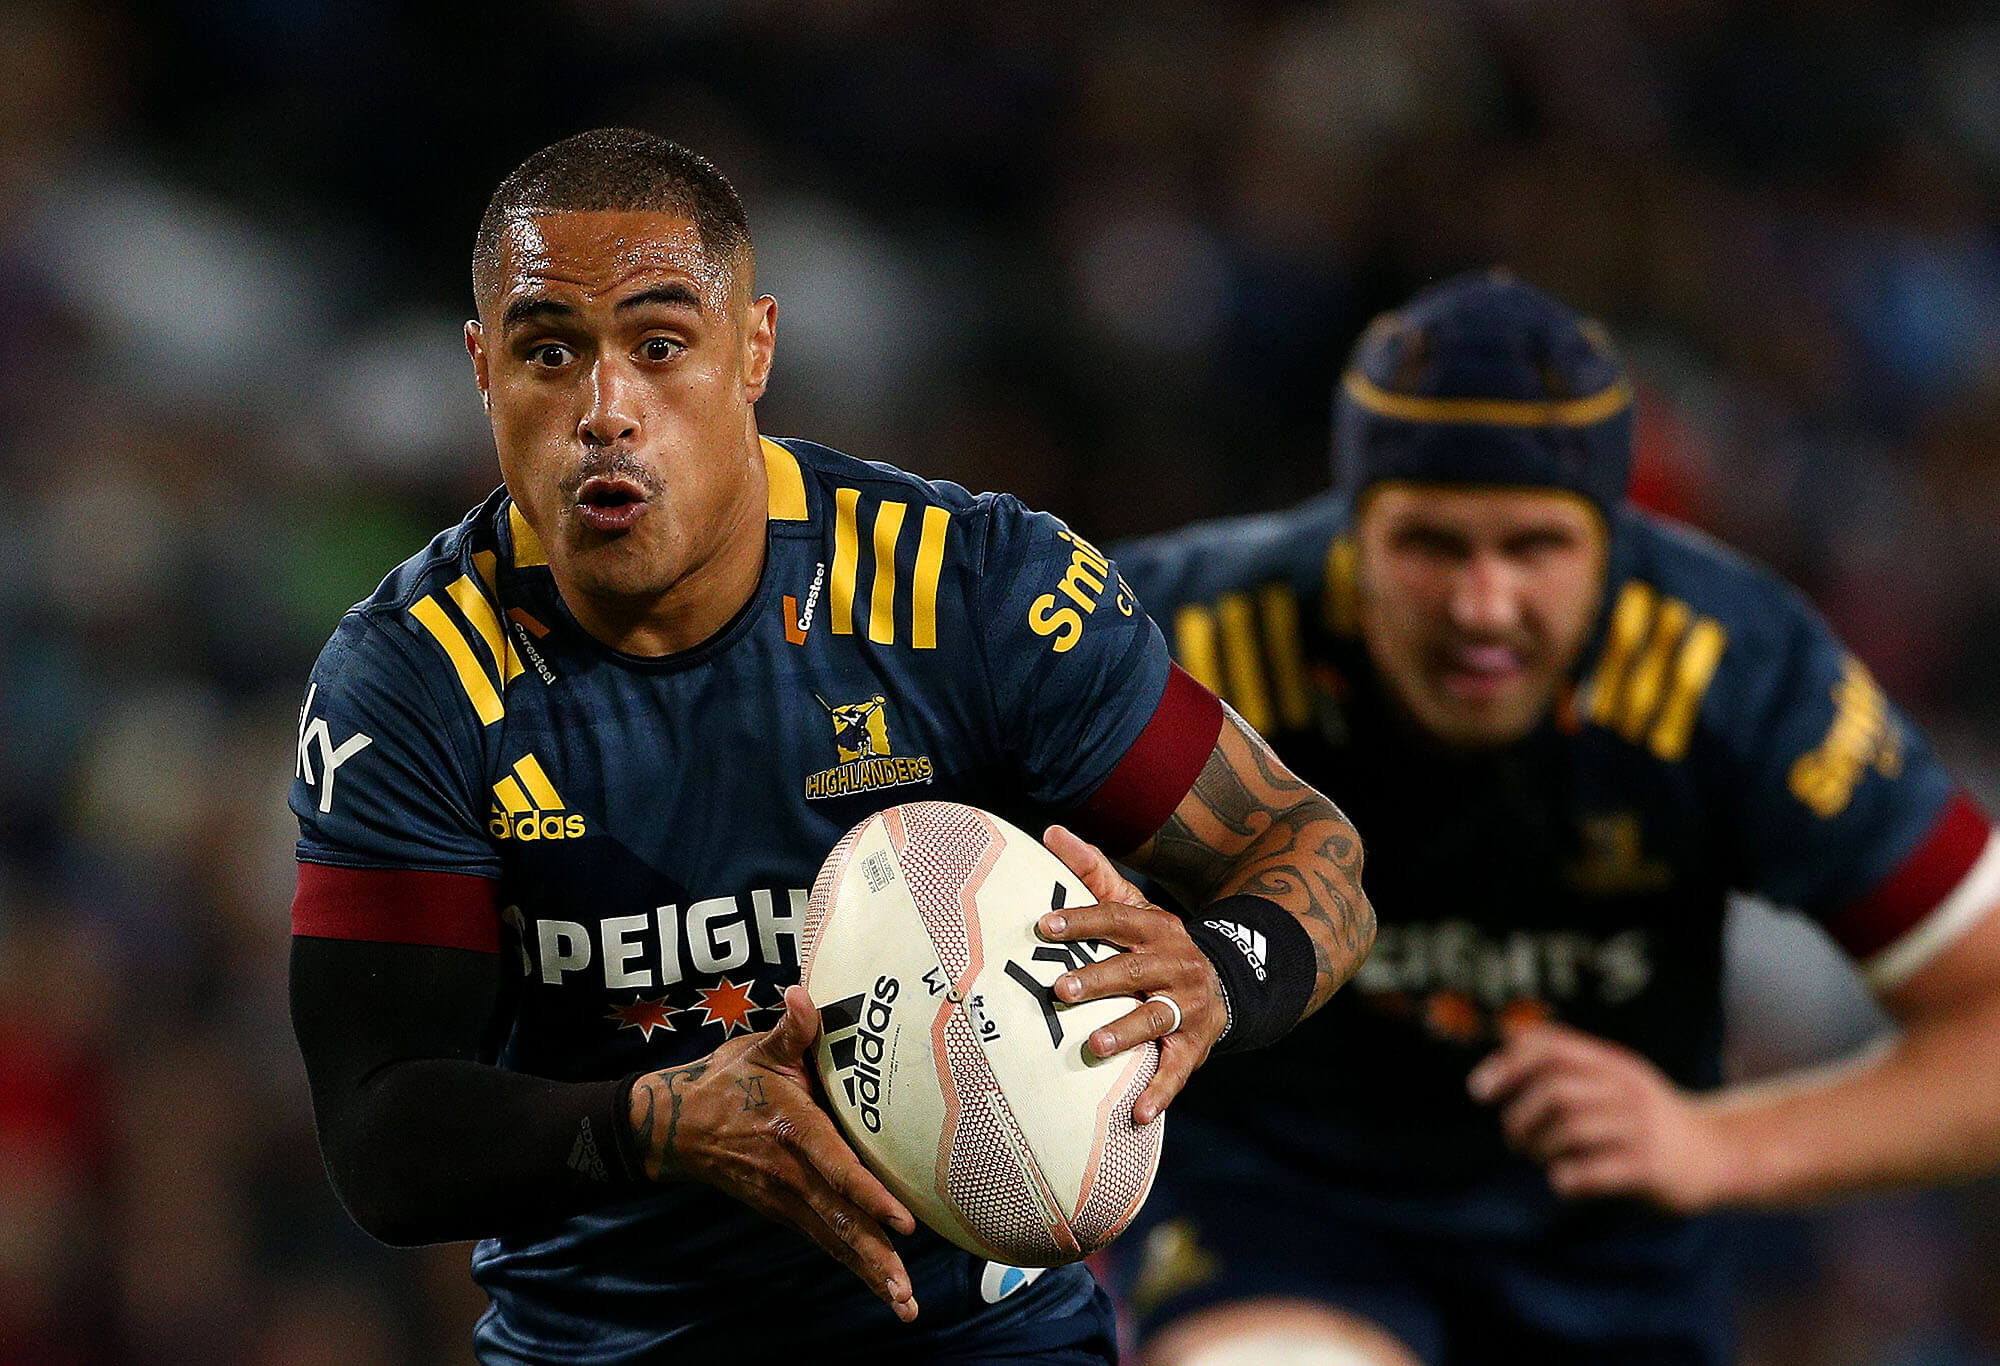 Aaron Smith of the Highlanders runs with the ball